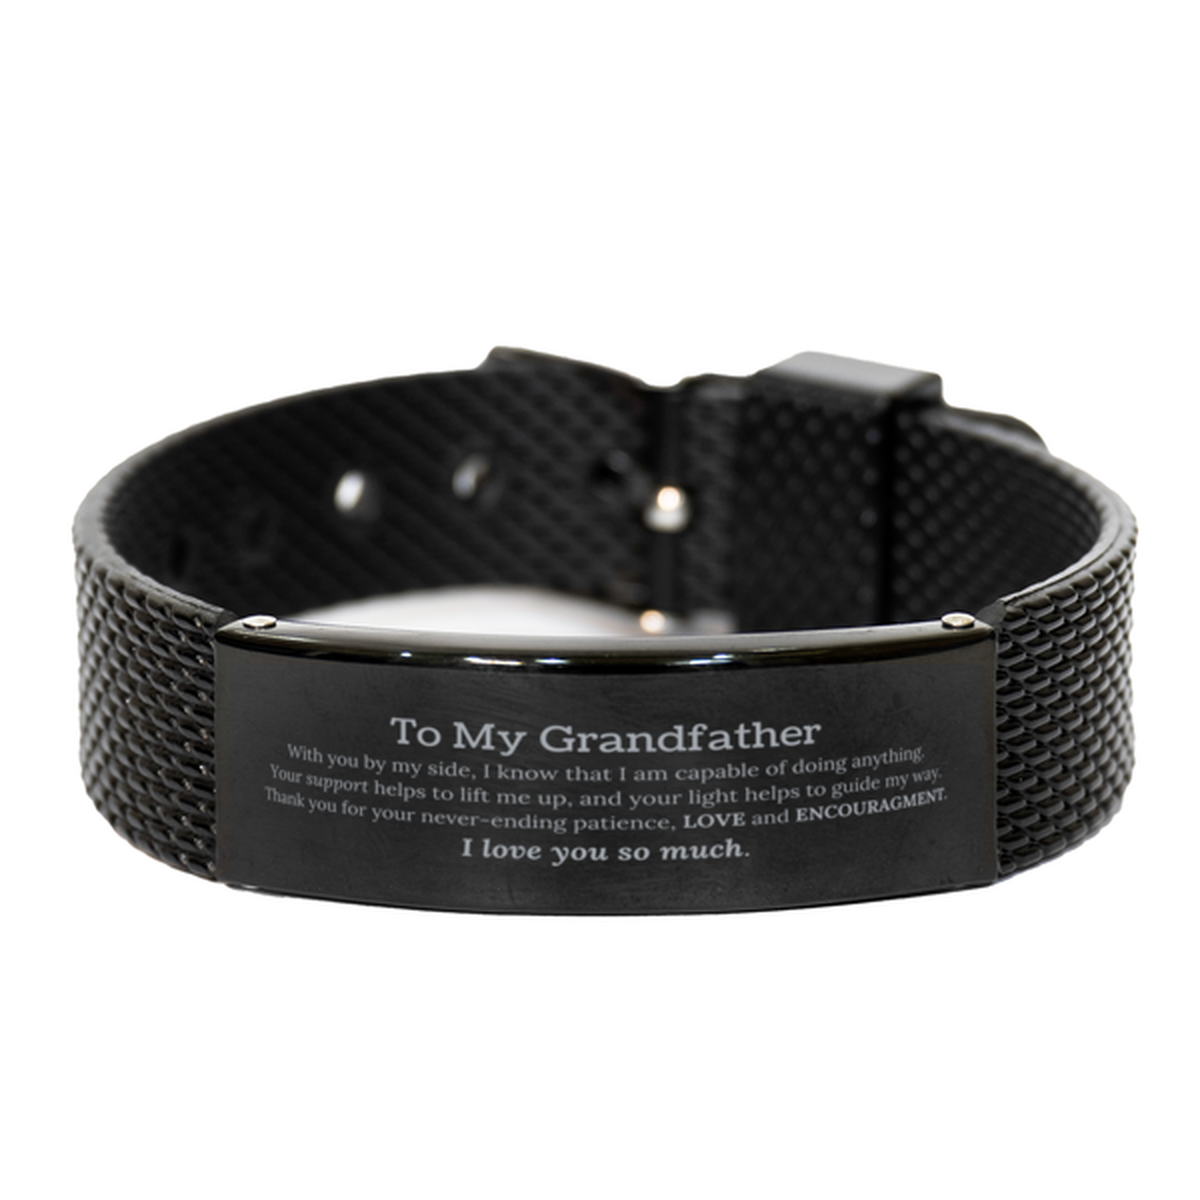 Appreciation Grandfather Black Shark Mesh Bracelet Gifts, To My Grandfather Birthday Christmas Wedding Keepsake Gifts for Grandfather With you by my side, I know that I am capable of doing anything. I love you so much